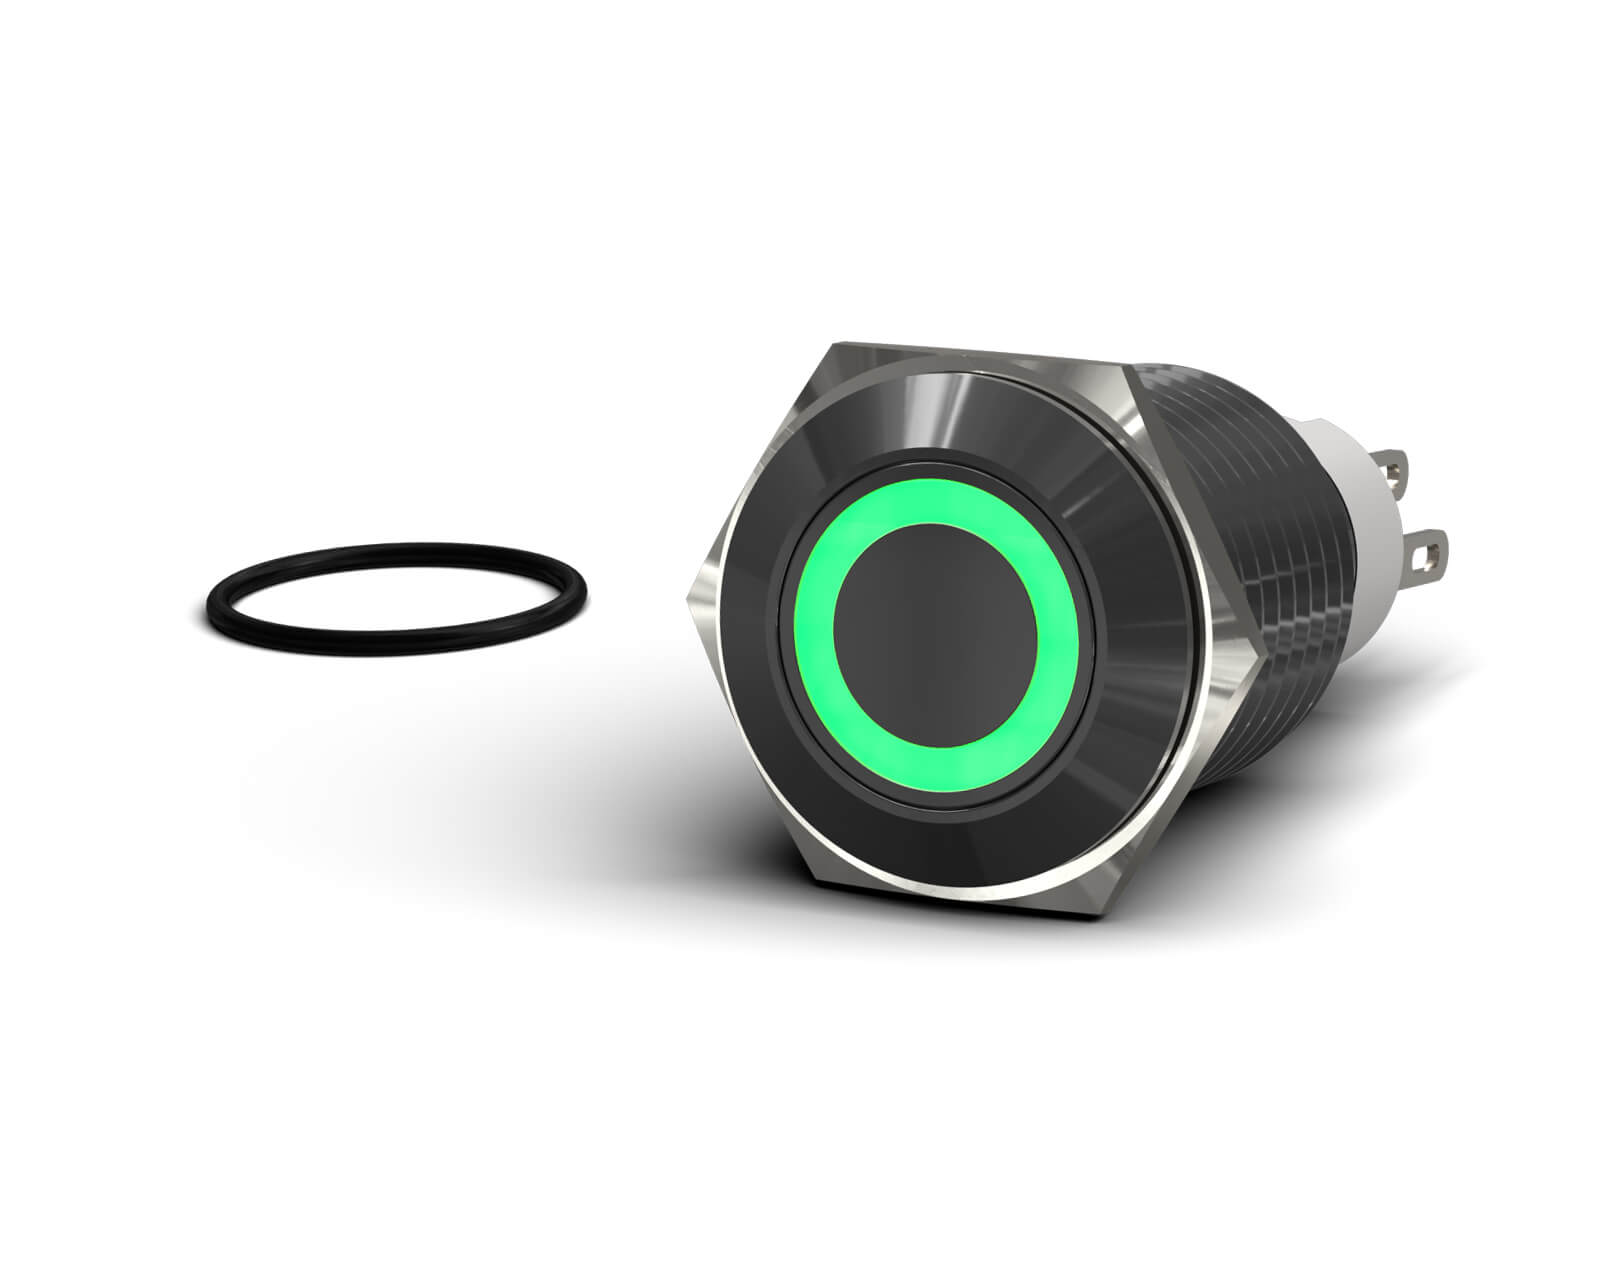 PrimoChill Black Aluminum Latching Vandal Resistant Switch - 16mm - PrimoChill - KEEPING IT COOL Green LED Ring